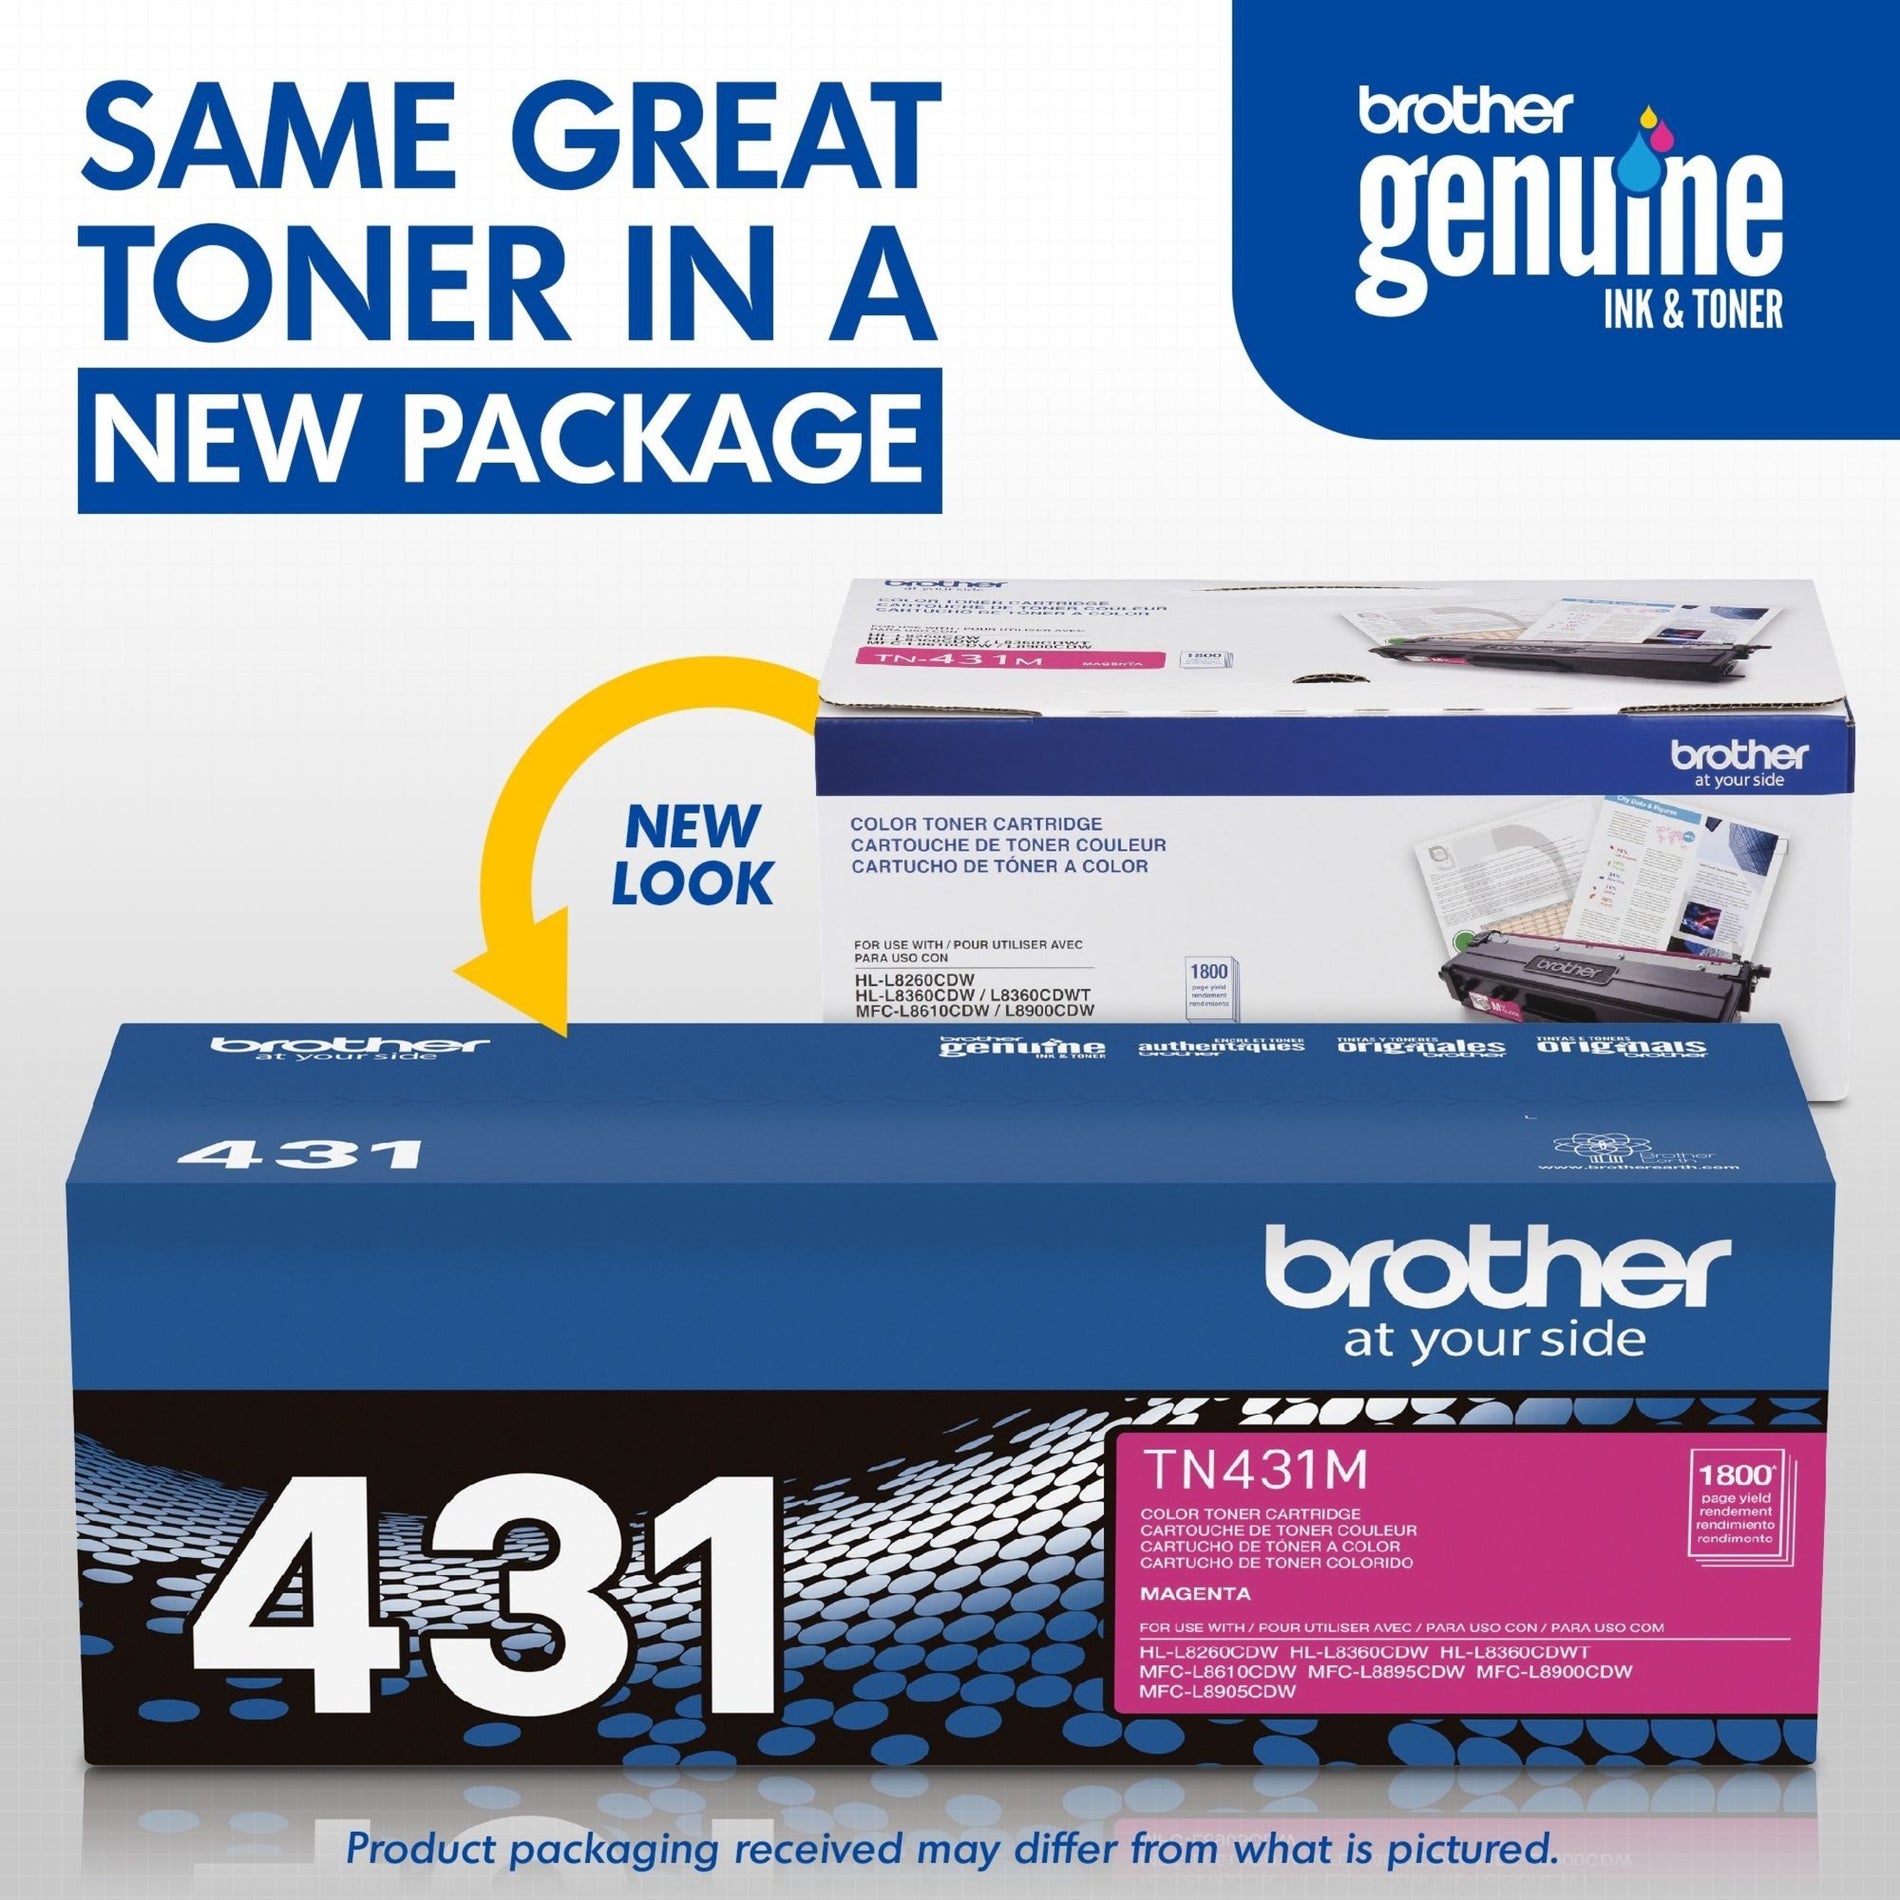 Brother TN431M Toner Cartridge, Magenta, 1800 Pages Standard Yield